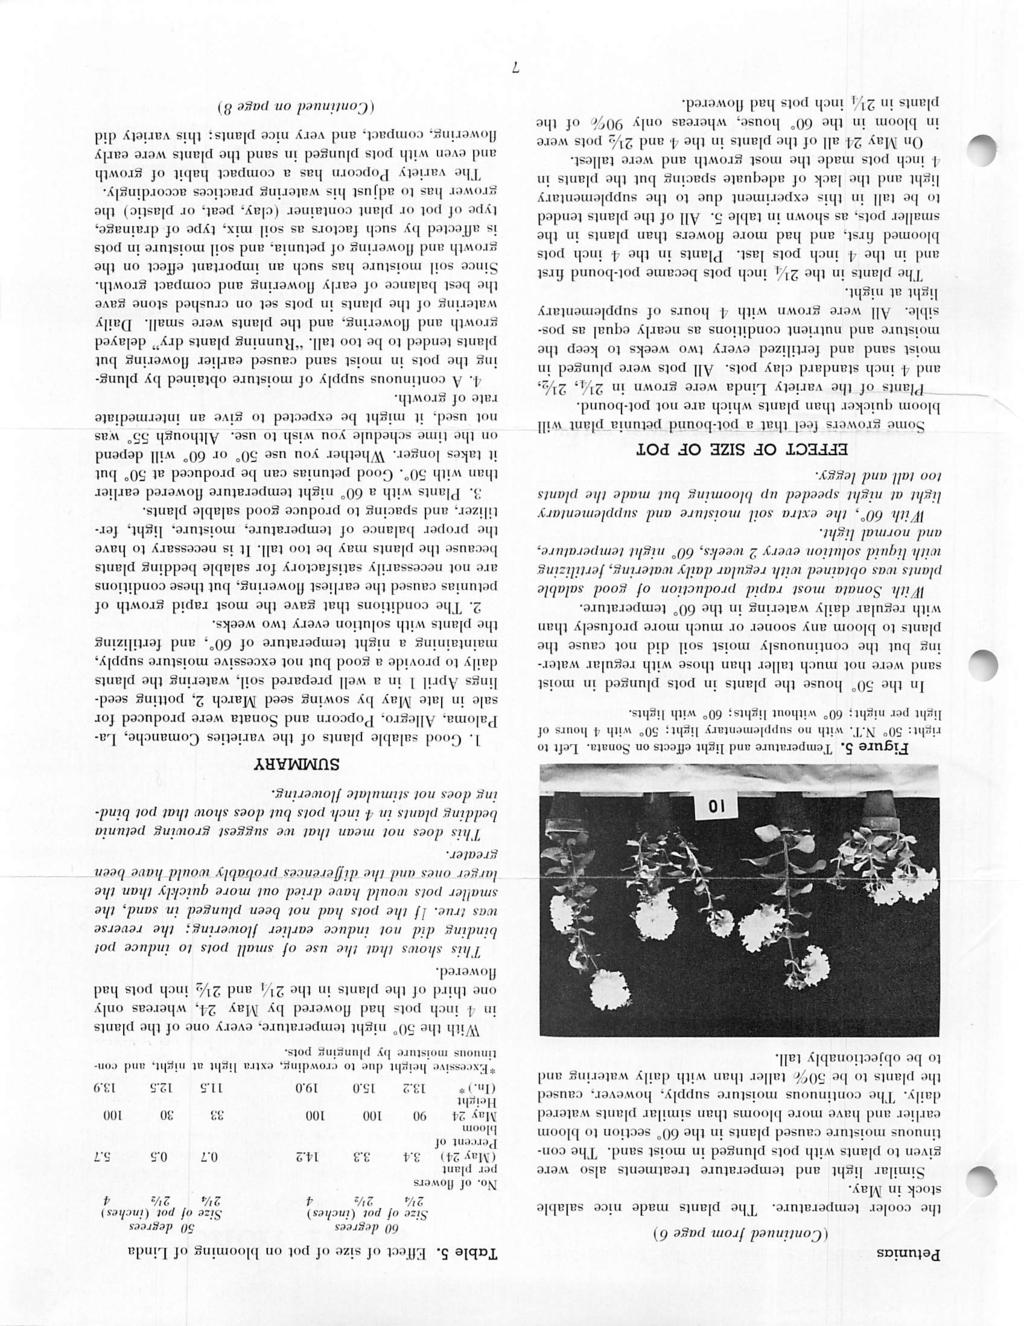 (Continued from page 6) the cooler temperature. The plants made nice salable stock in May. Similar light and temperature treatments also were given to plants with pots plunged in moist sand.